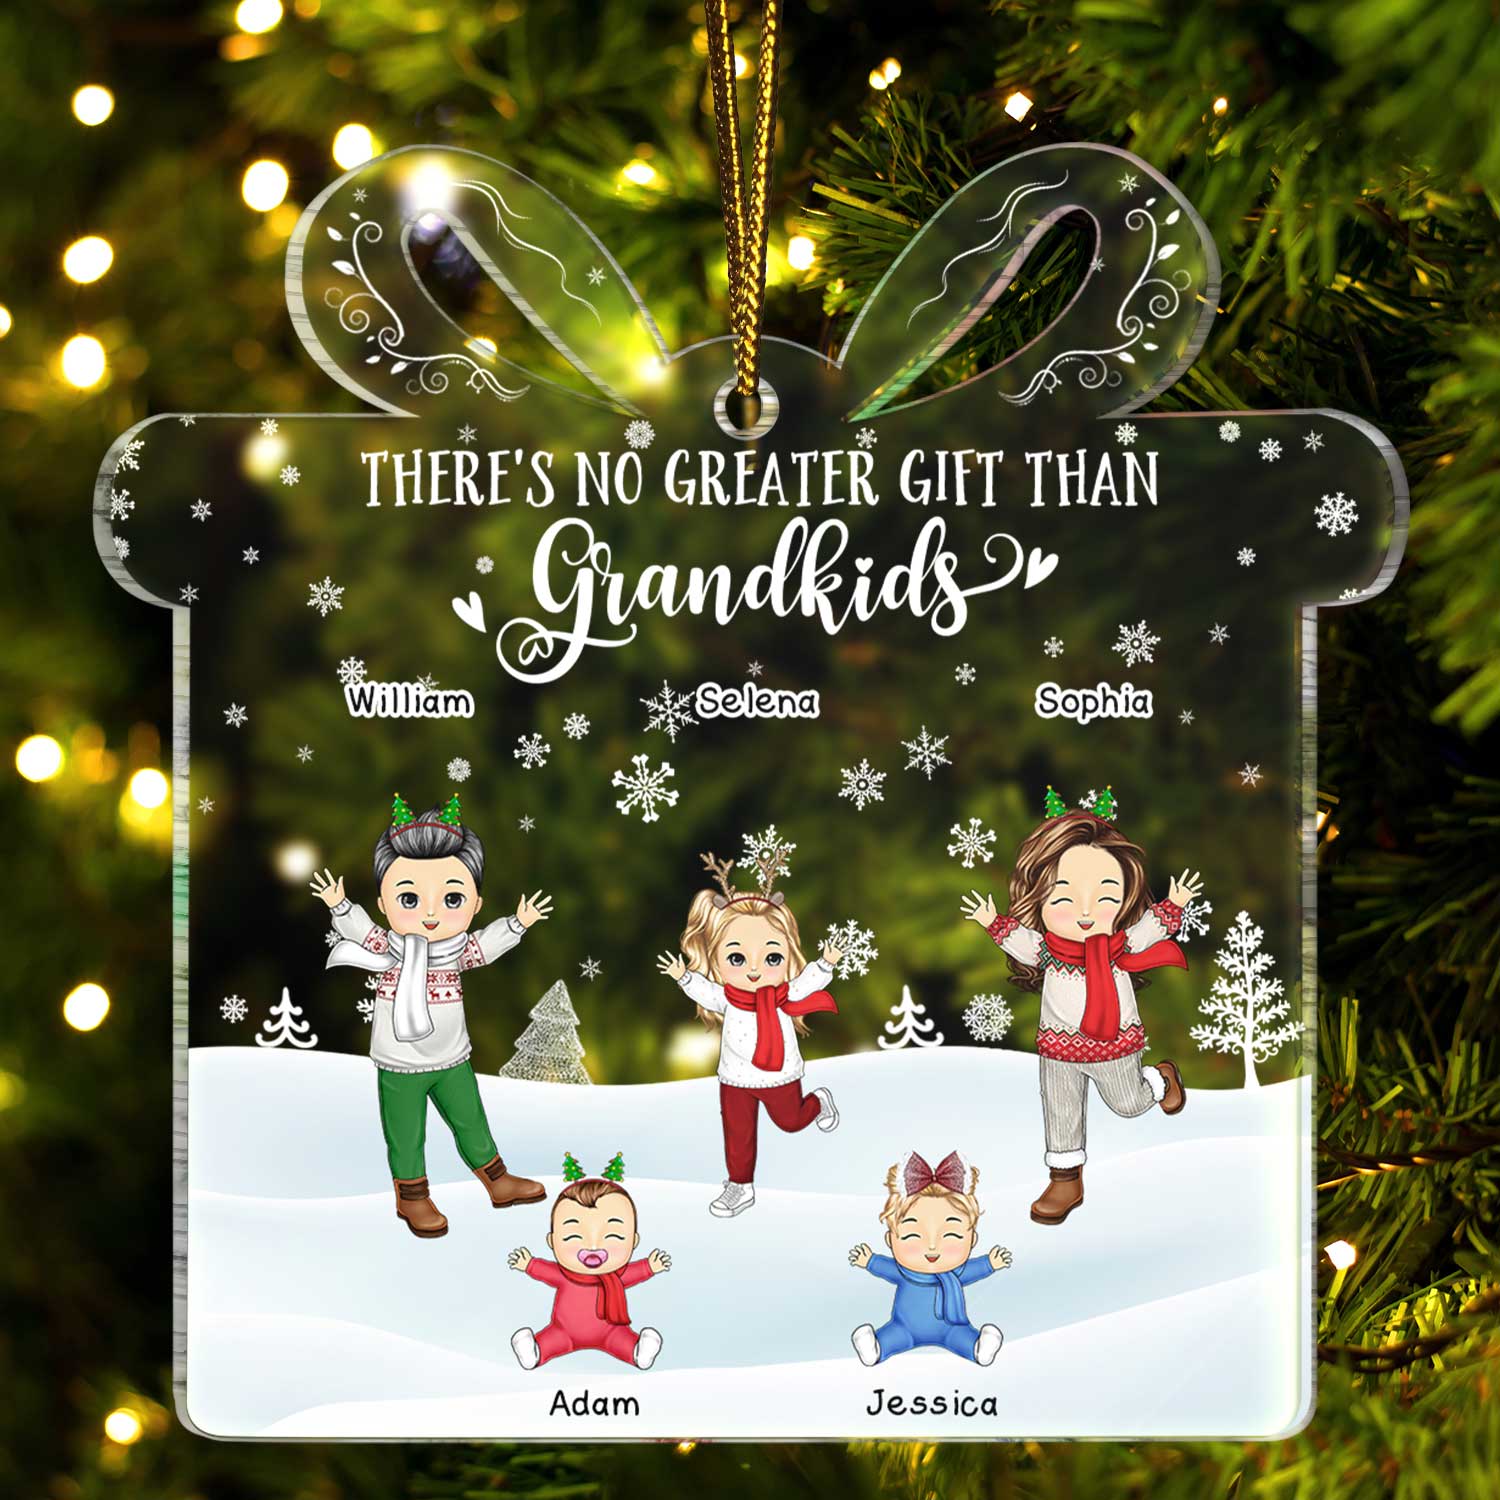 There's No Greater Gift Than Grandkids - Christmas Gift For Family, Grandpa, Grandma, Grandparents - Personalized Custom Shaped Acrylic Ornament